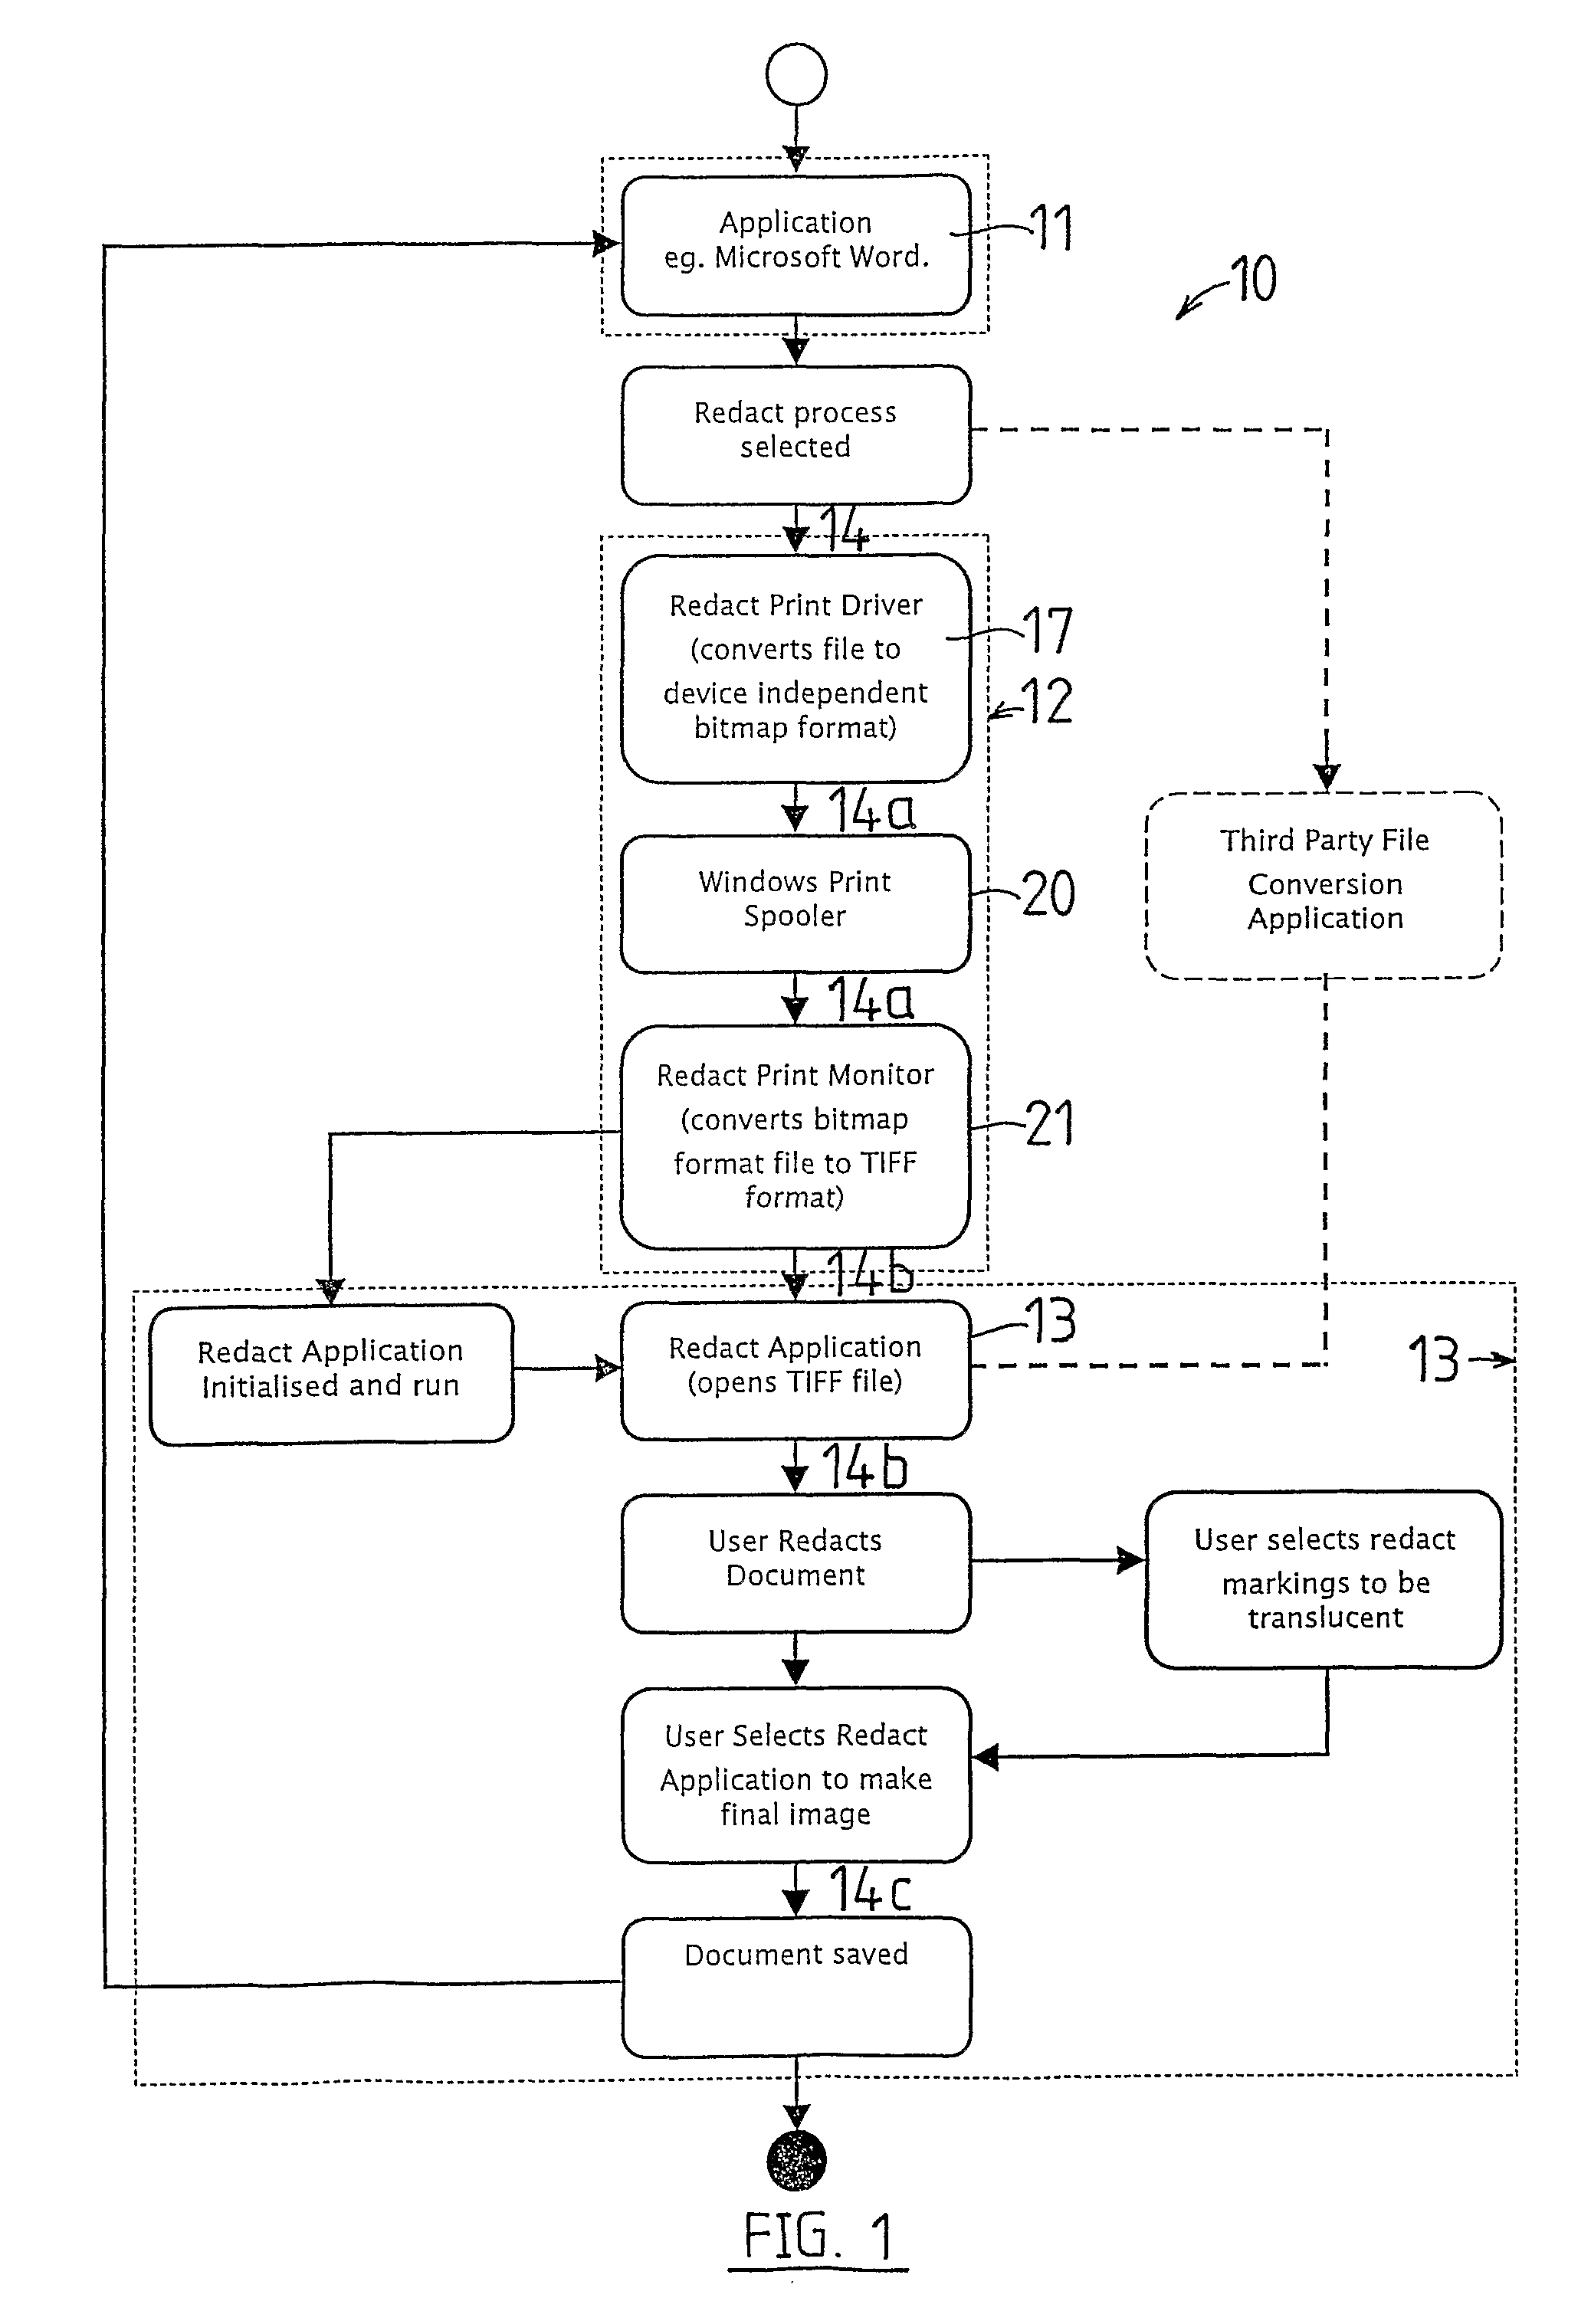 Process for electronic document redaction